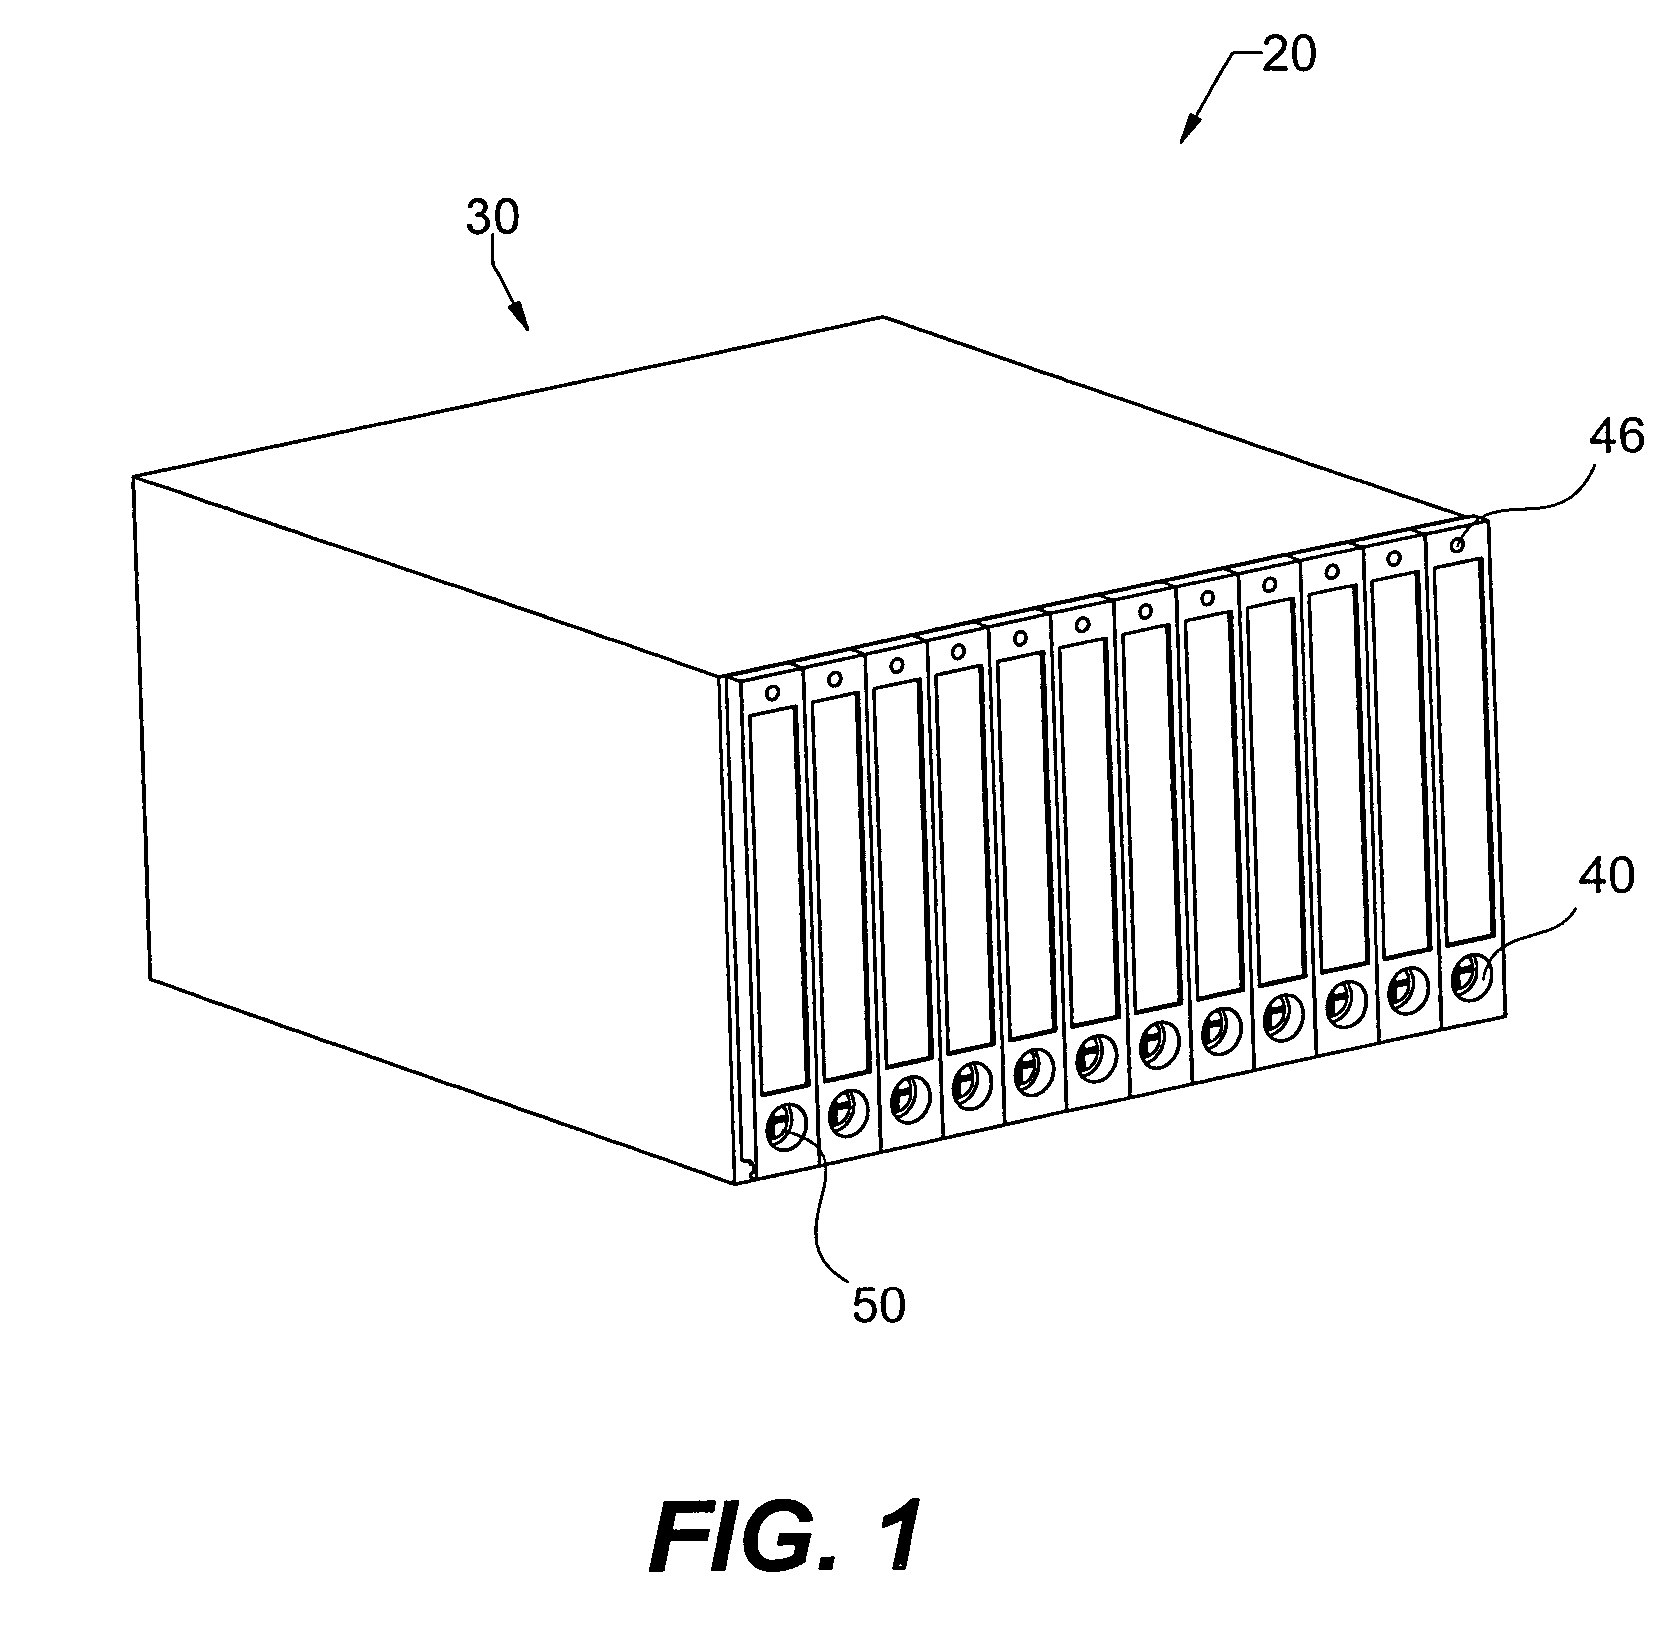 Method of reducing fluid emissions from a global spray cooling system